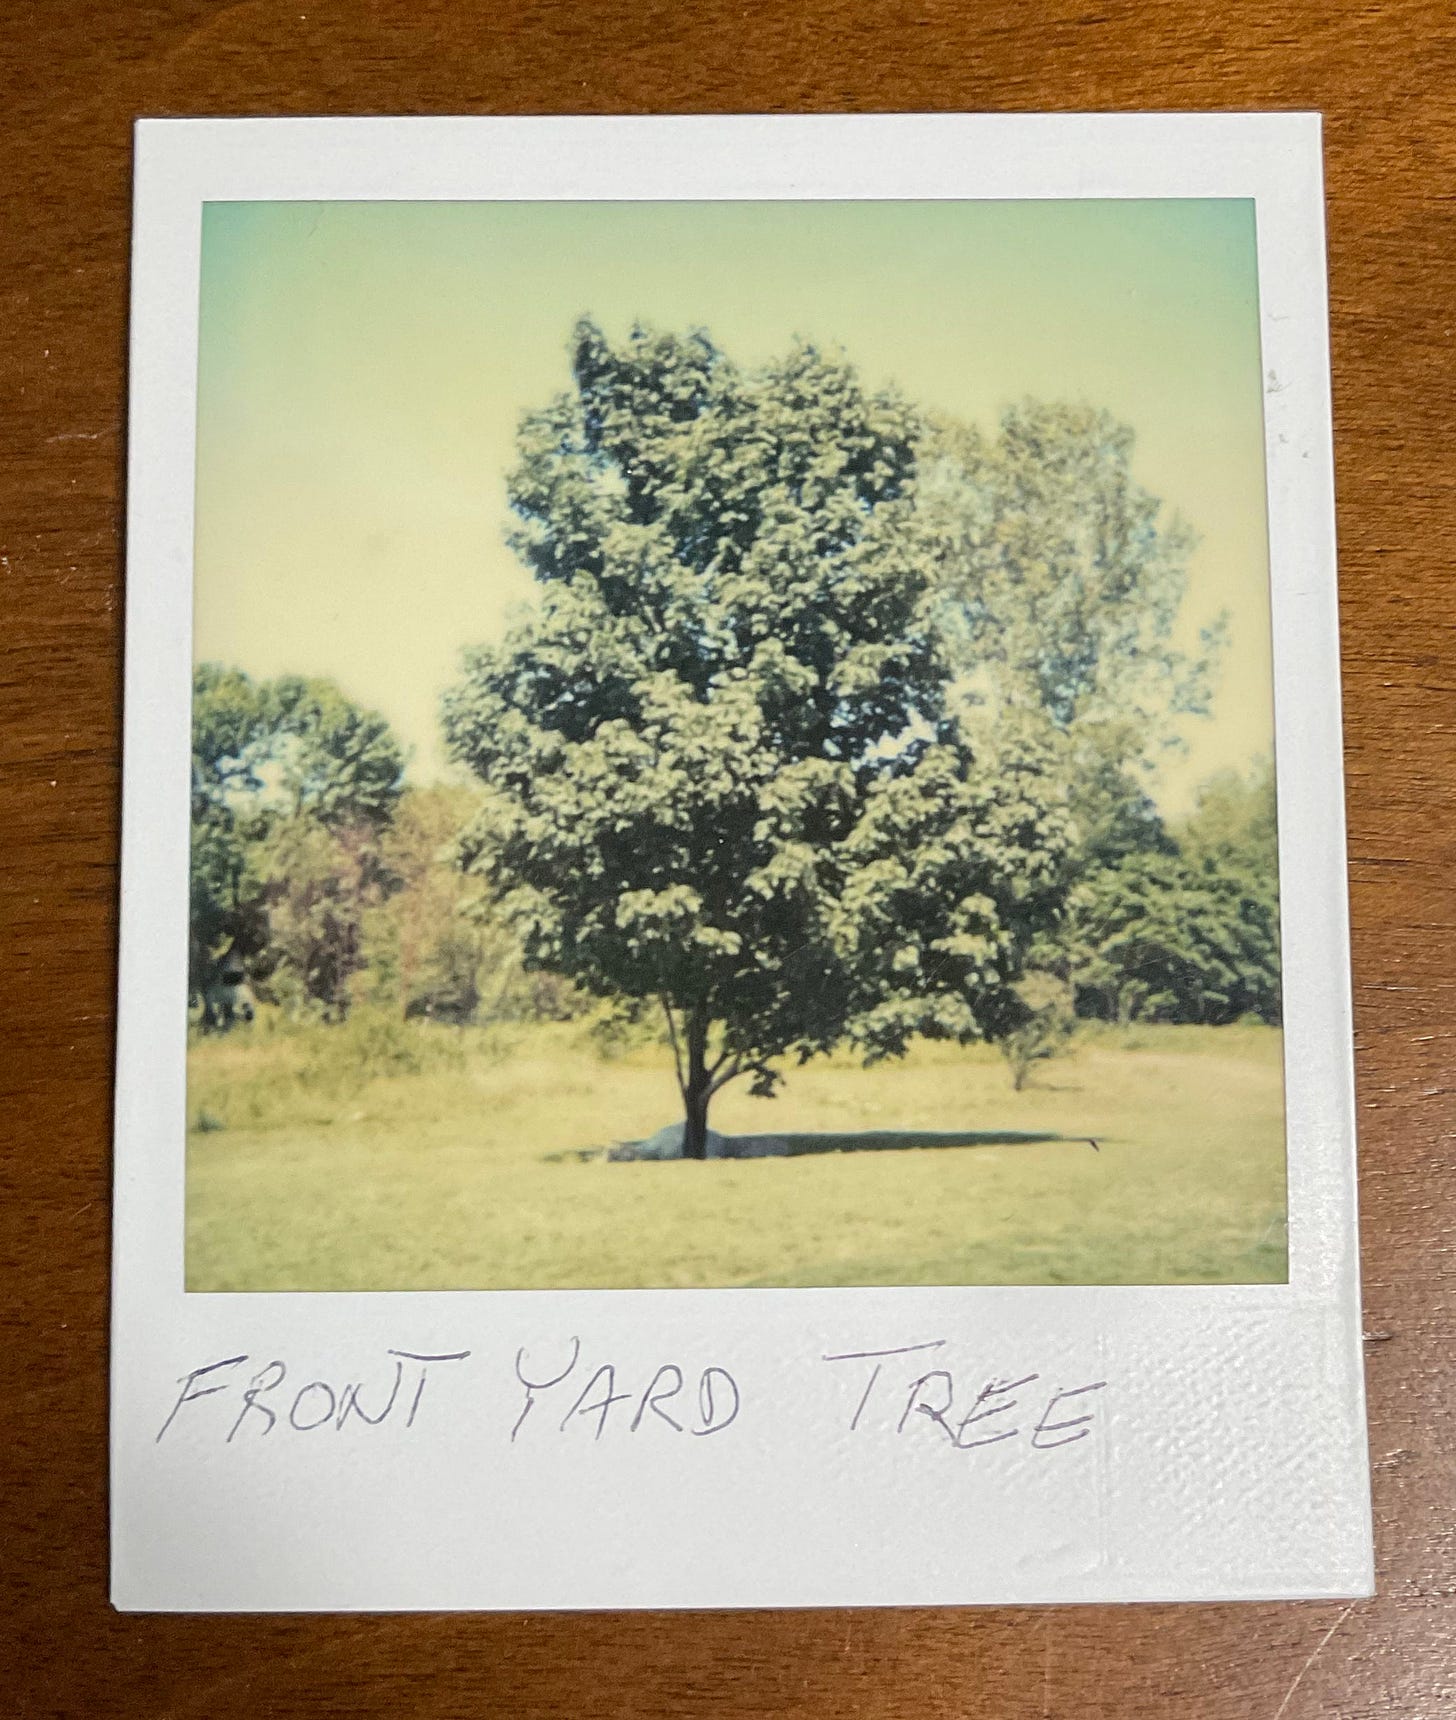 A Polaroid atop a wooden table background. The photo is labeled "FRONT YARD TREE" and depicts a tree of moderate height standing in a yard.